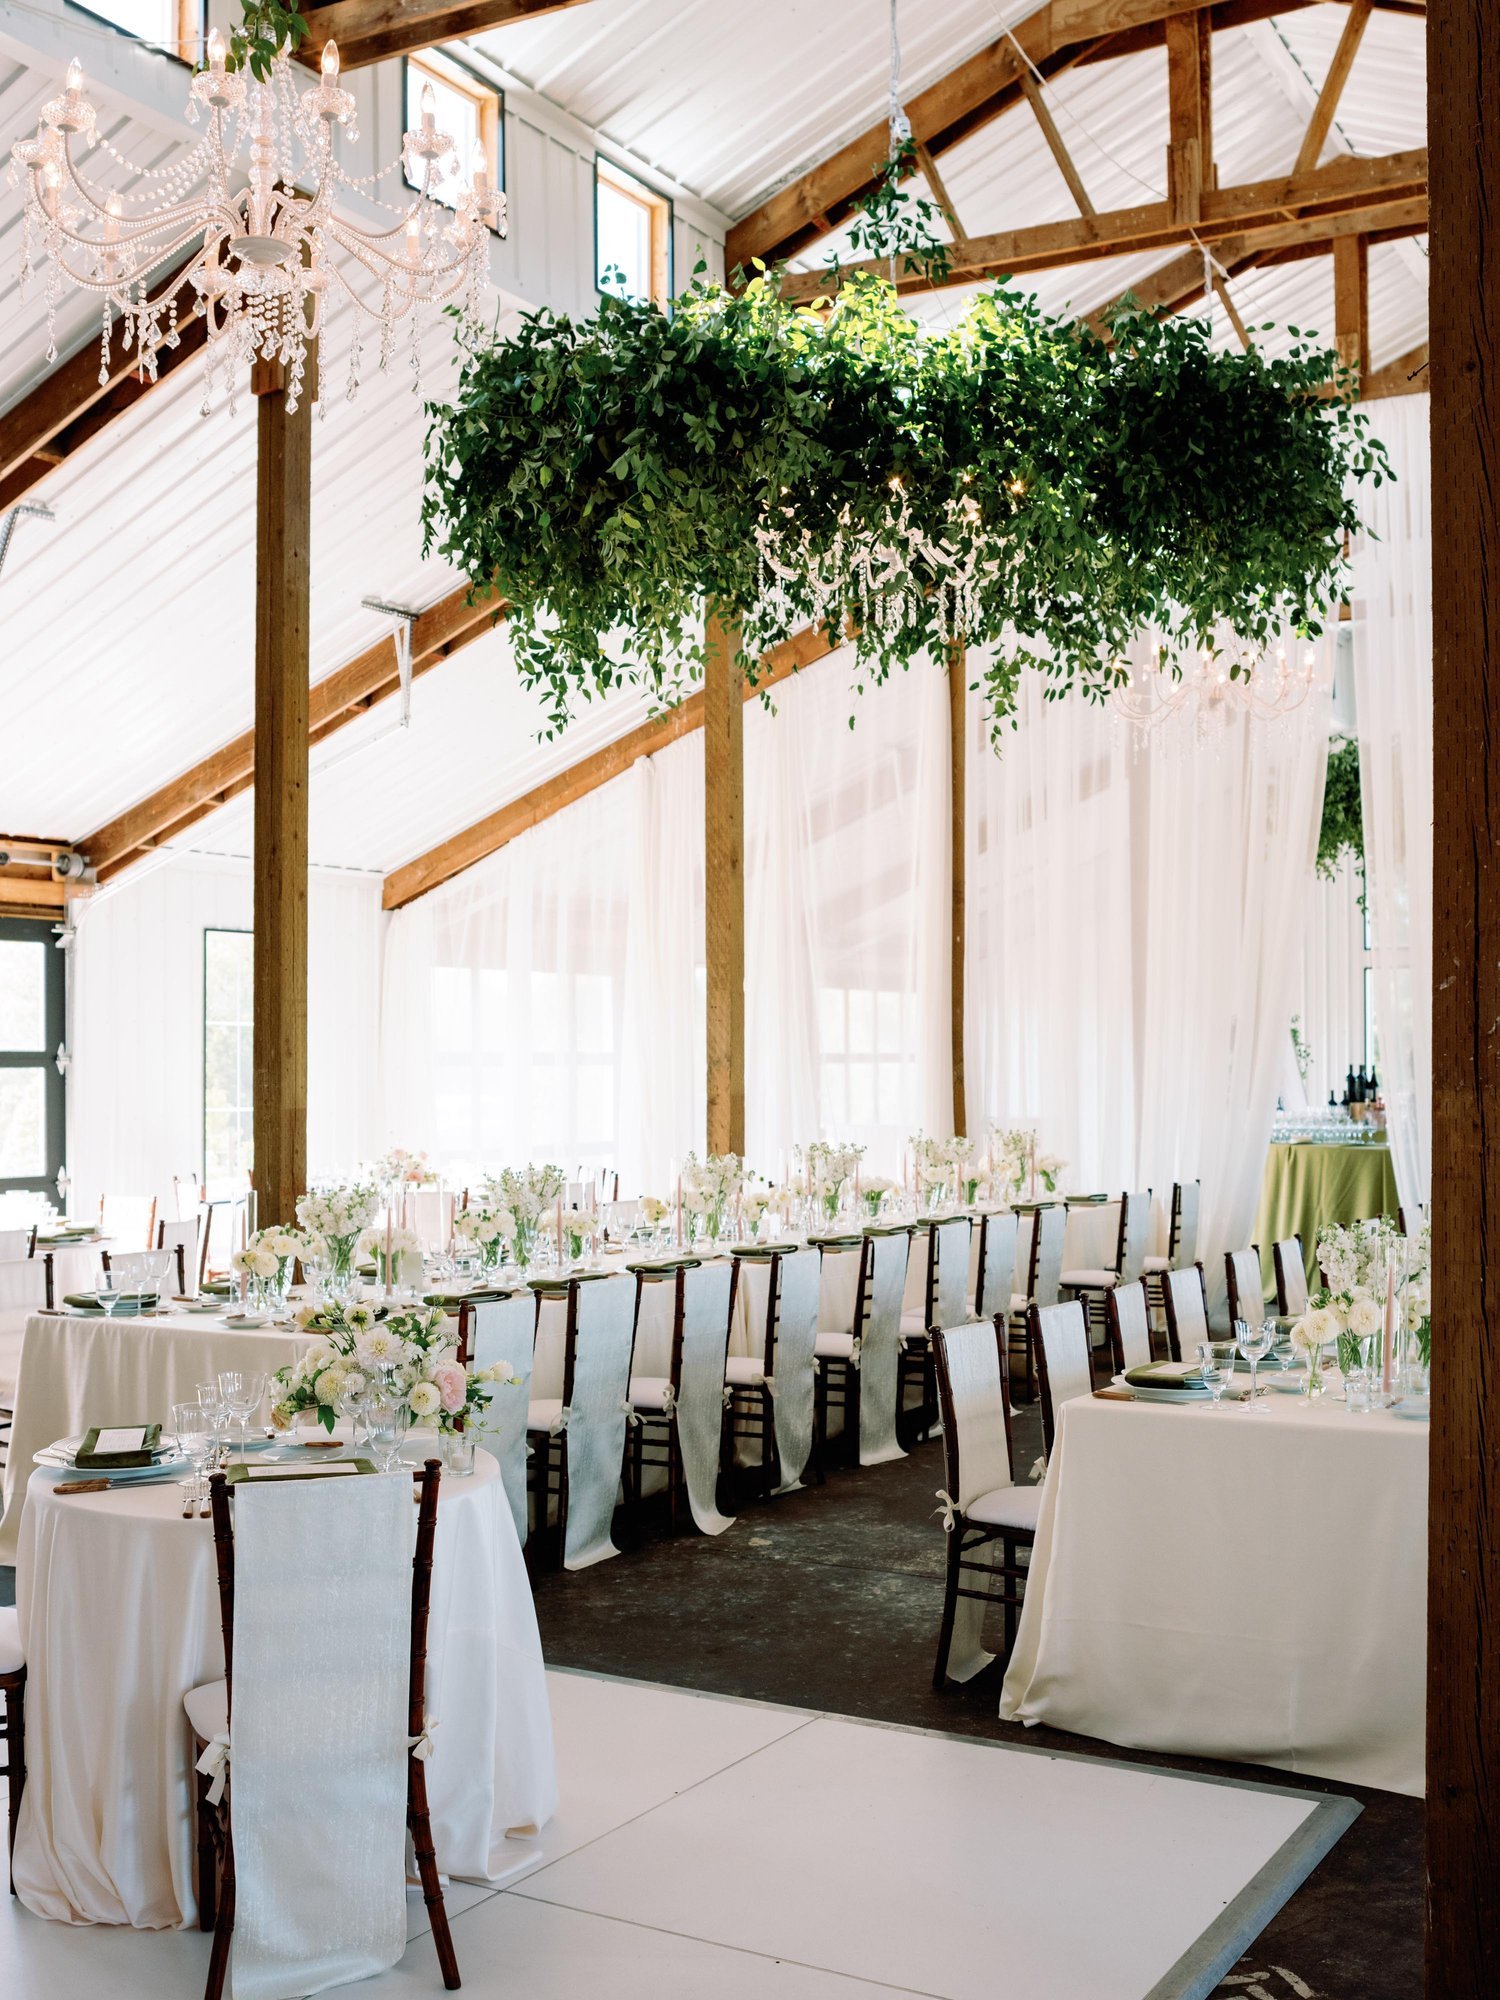 unique-hanging-greenery-at-seattle-wedding-reception.jpg